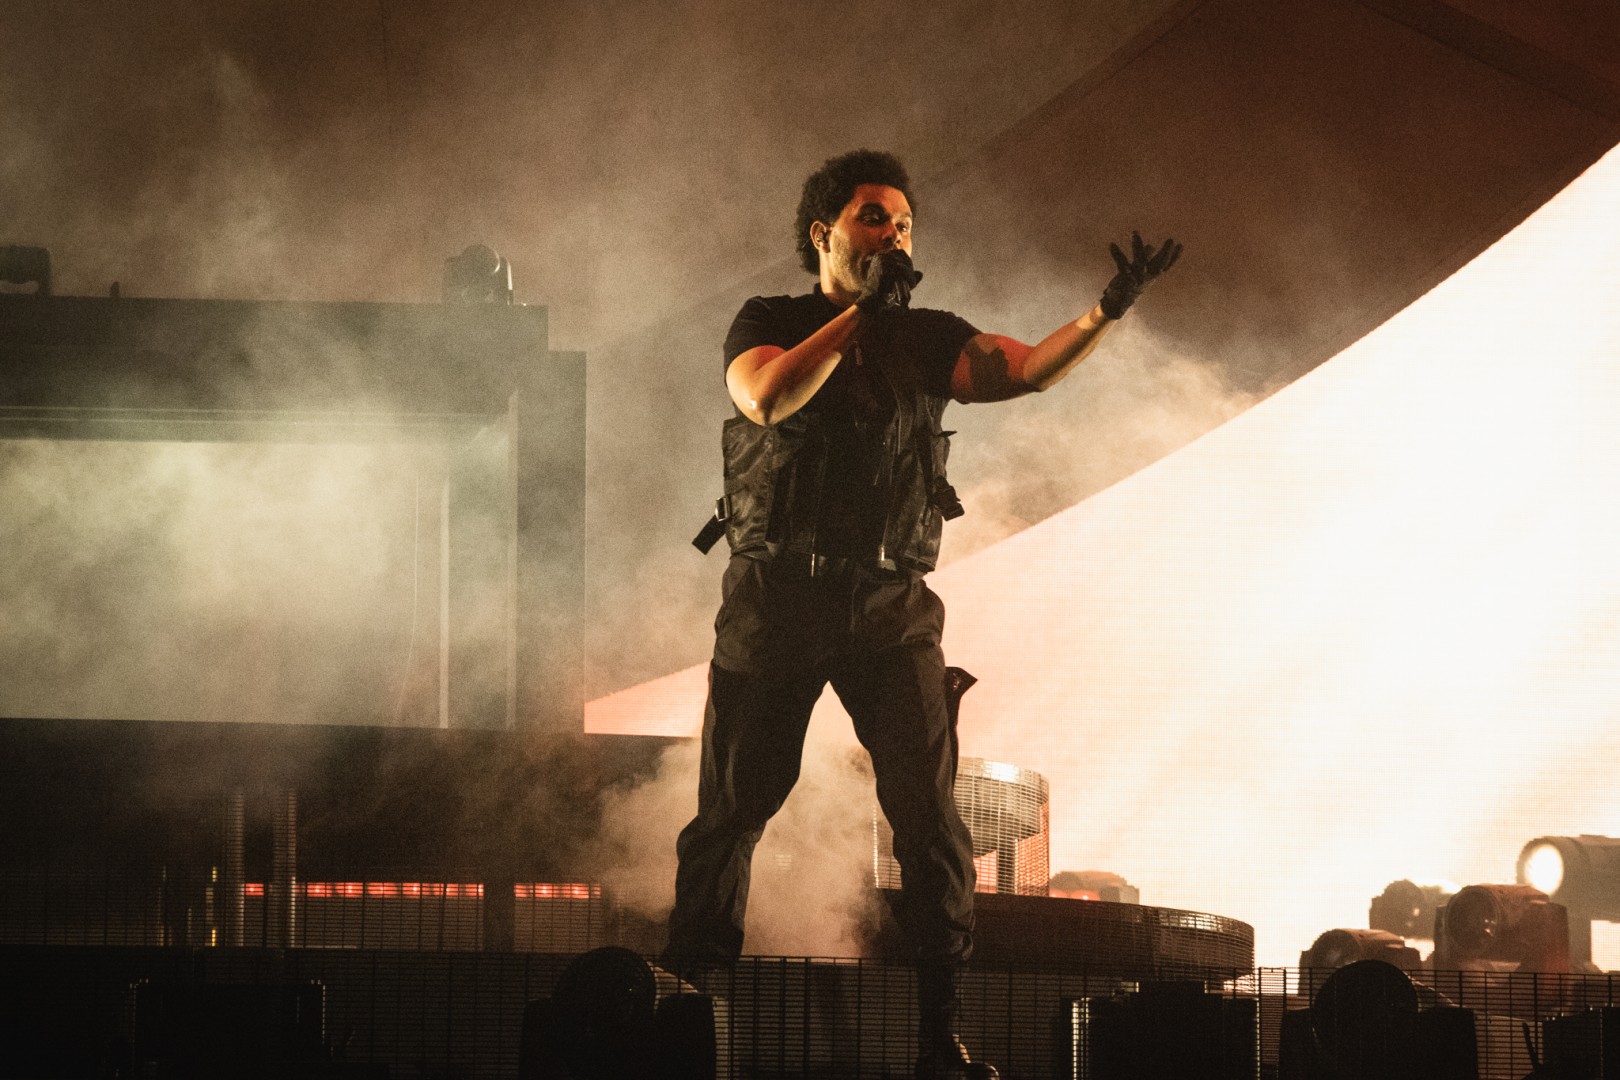 The Weeknd at Empire Polo Club in Indio on April 18, 2022 (f7a4d448e2)